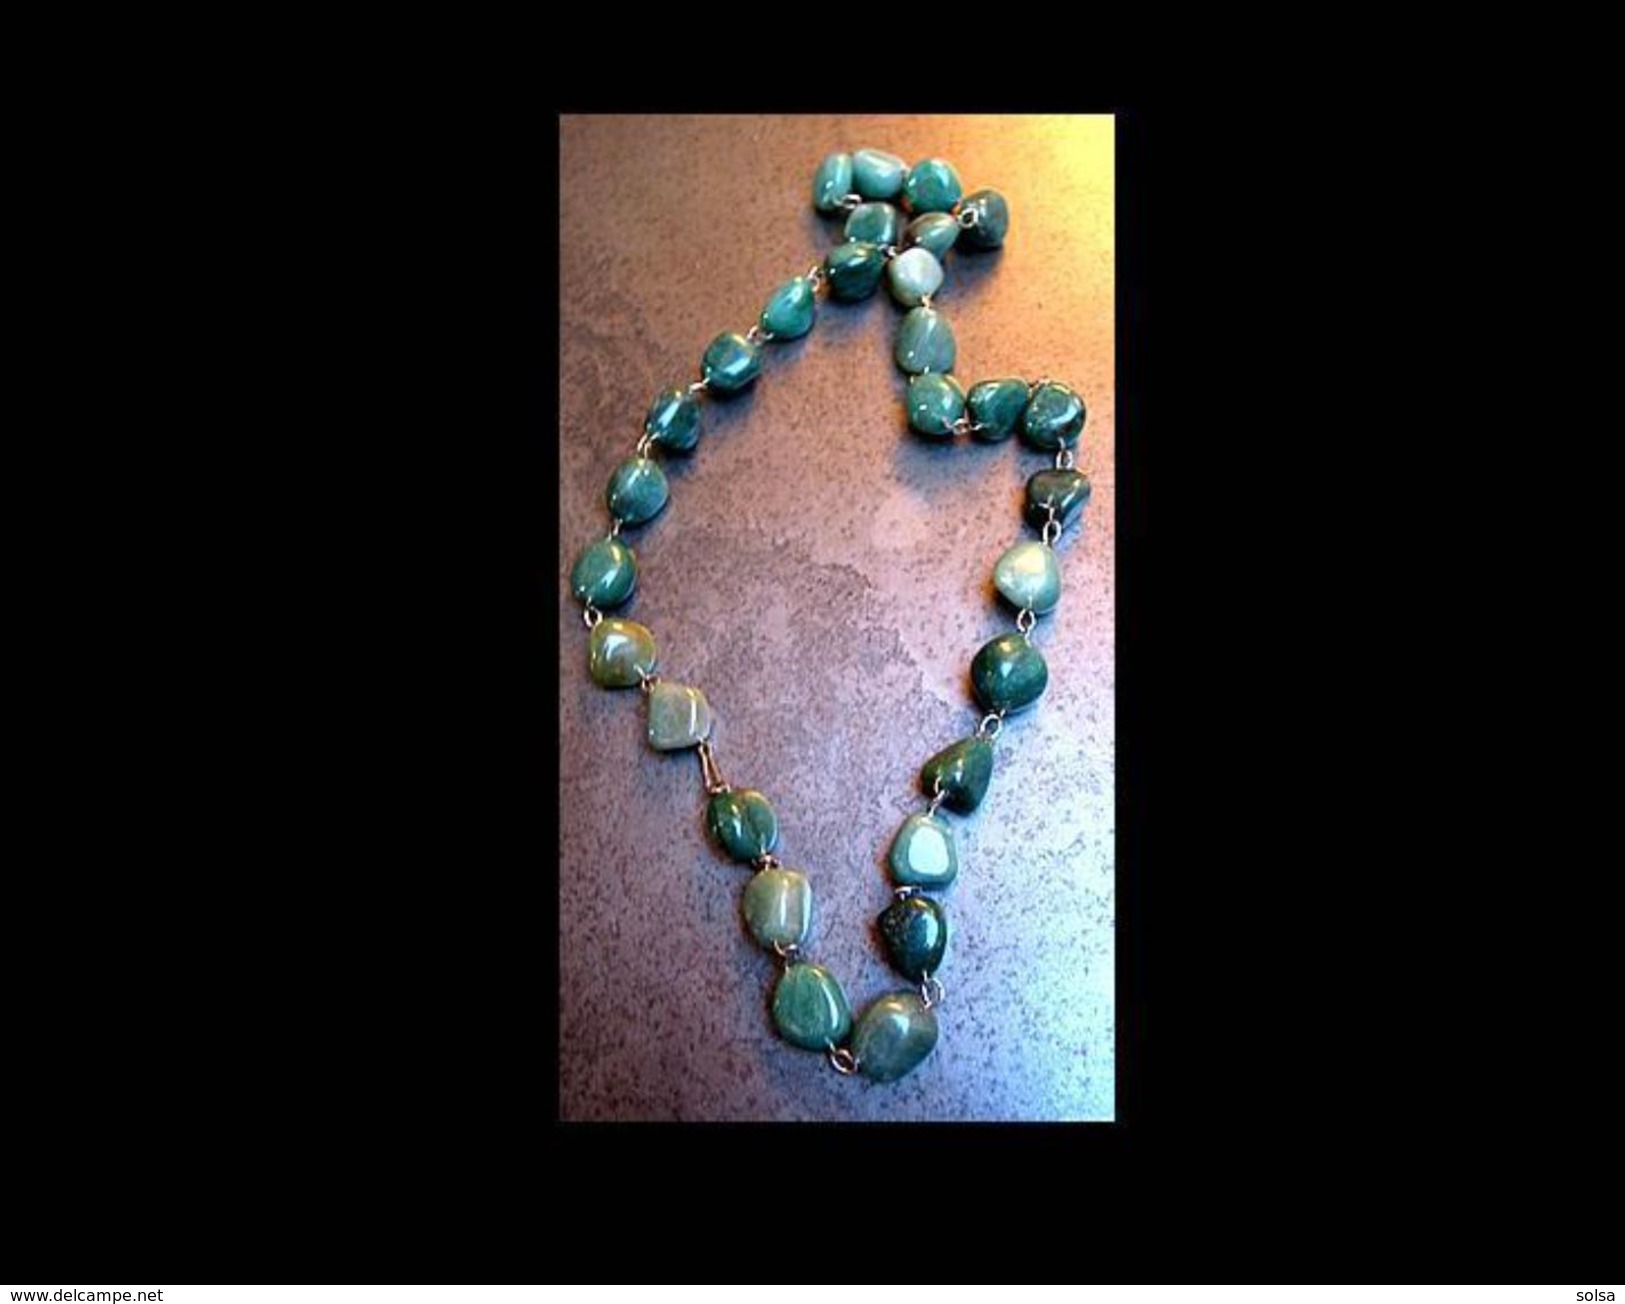 Beau Collier En Pierres Années 60 / Great Stone Necklace From The 60's - Colliers/Chaînes